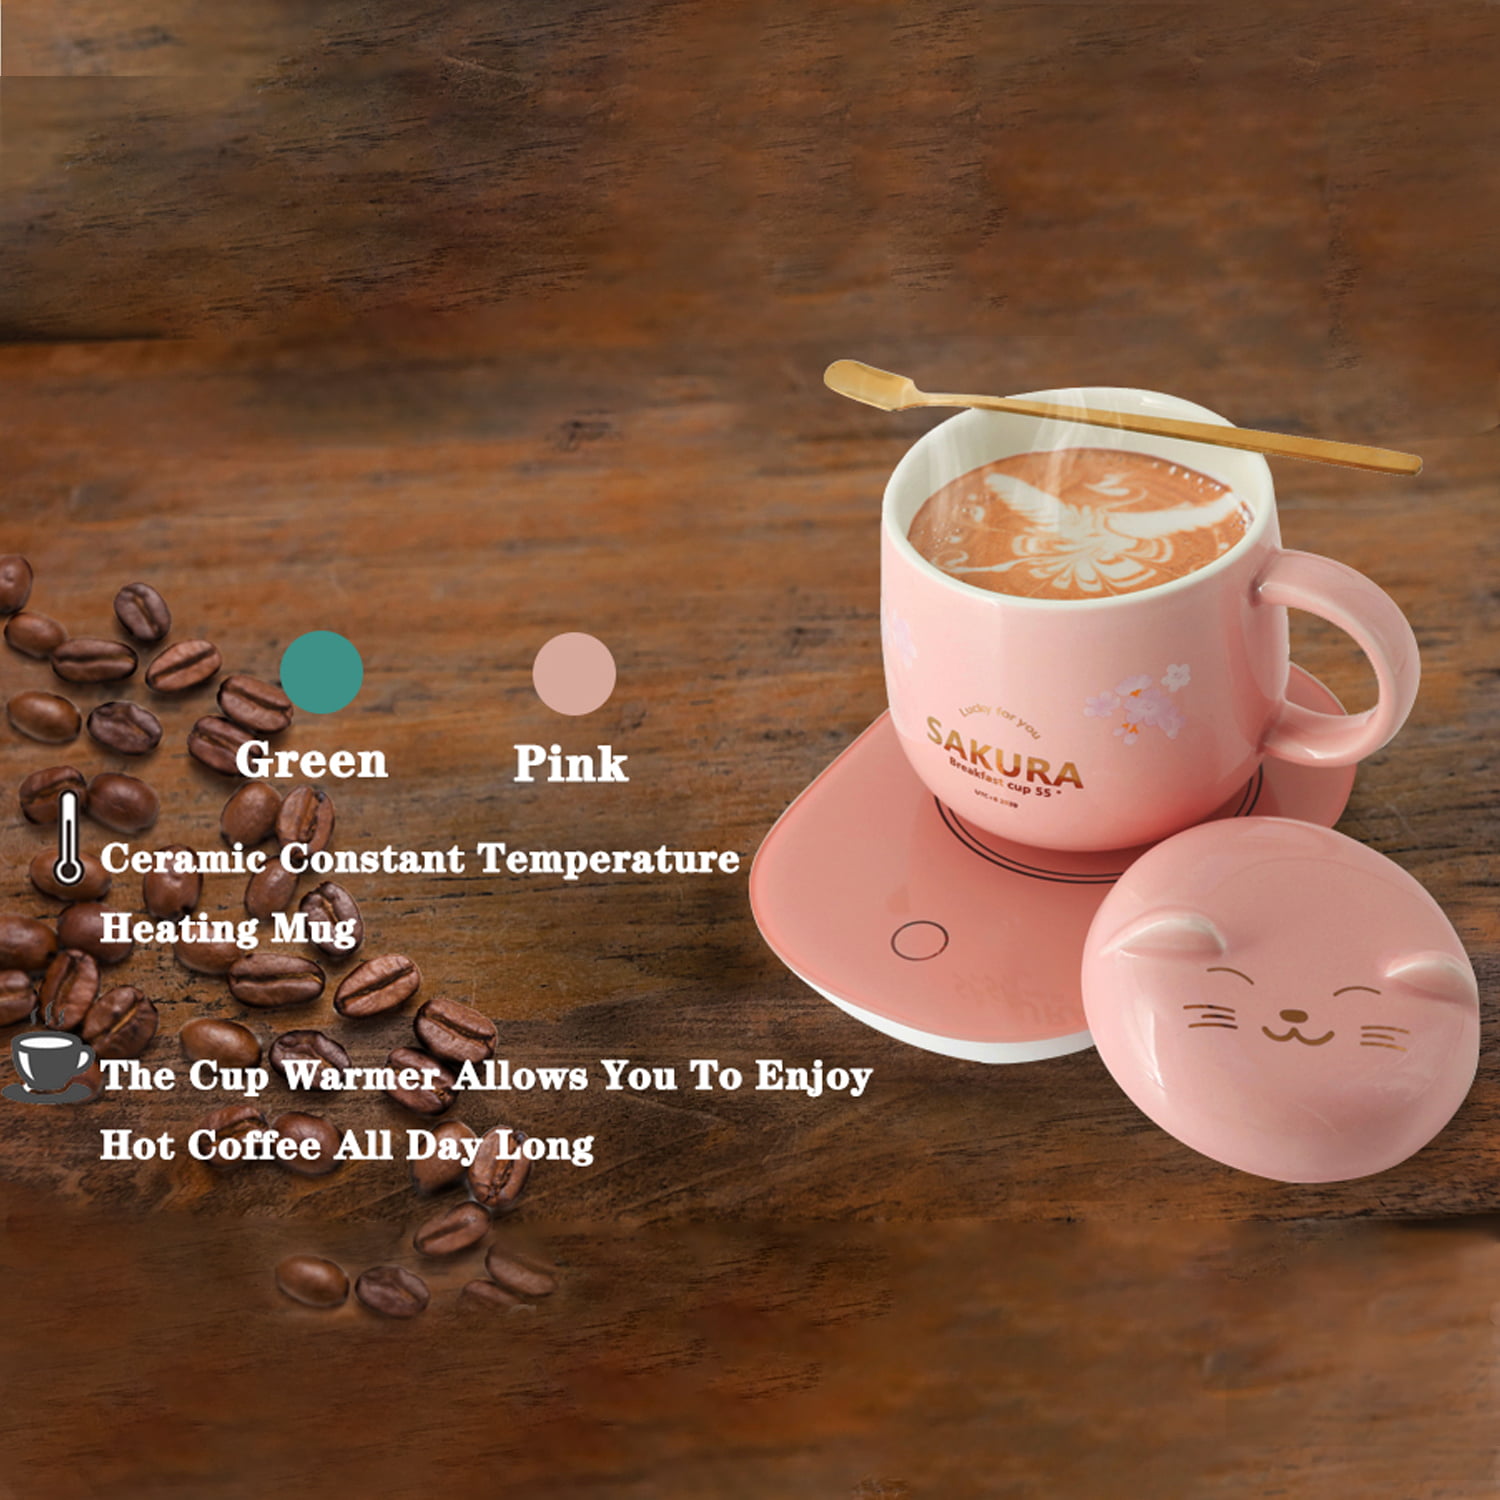 Lucky Portable Coffee Cup Warmer Heater Set